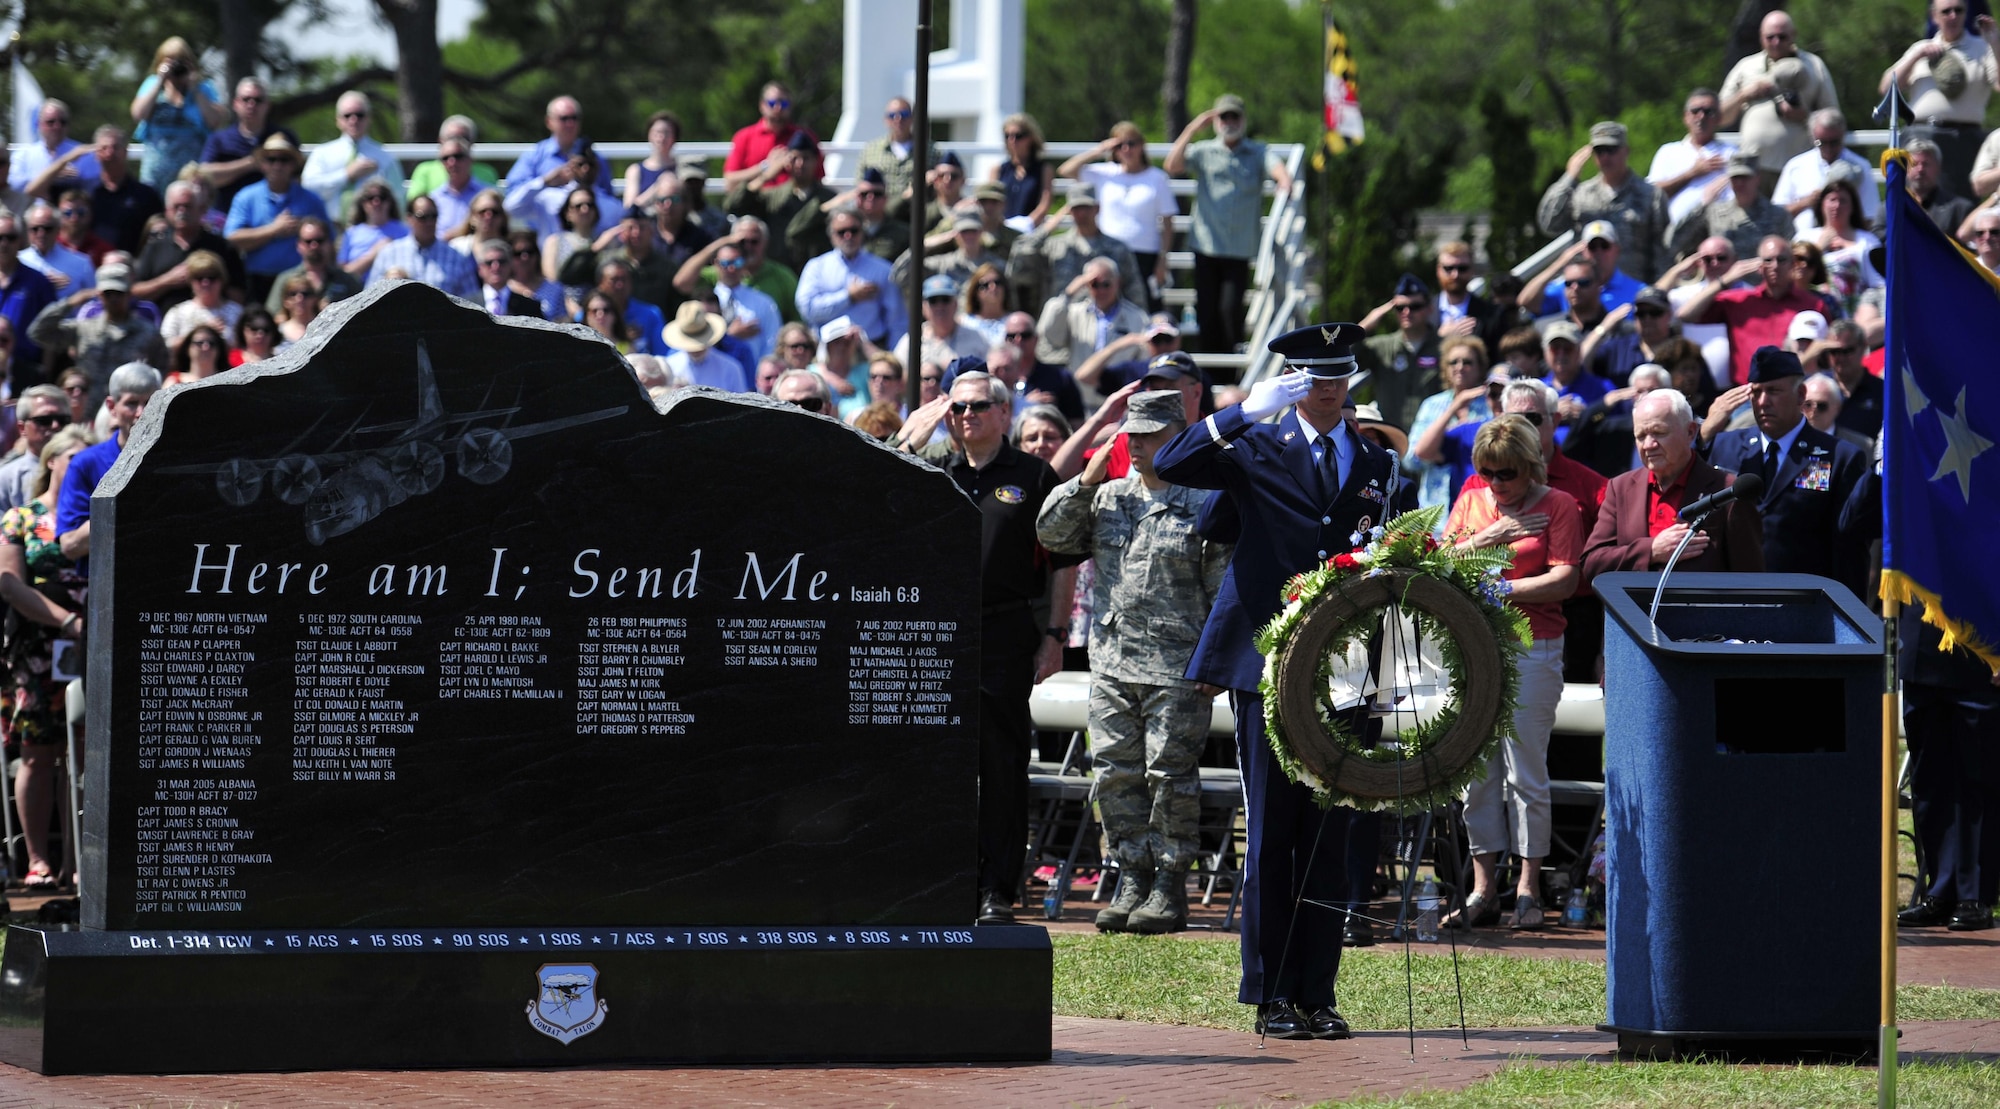 The audience pays their respect after an honor guardsman presents a wreath during the Combat Talon Memorial Dedication ceremony on Hurlburt Field, Fla., April 24, 2015. (U.S. Air Force photo/Staff Sgt. Melanie Holochwost)
